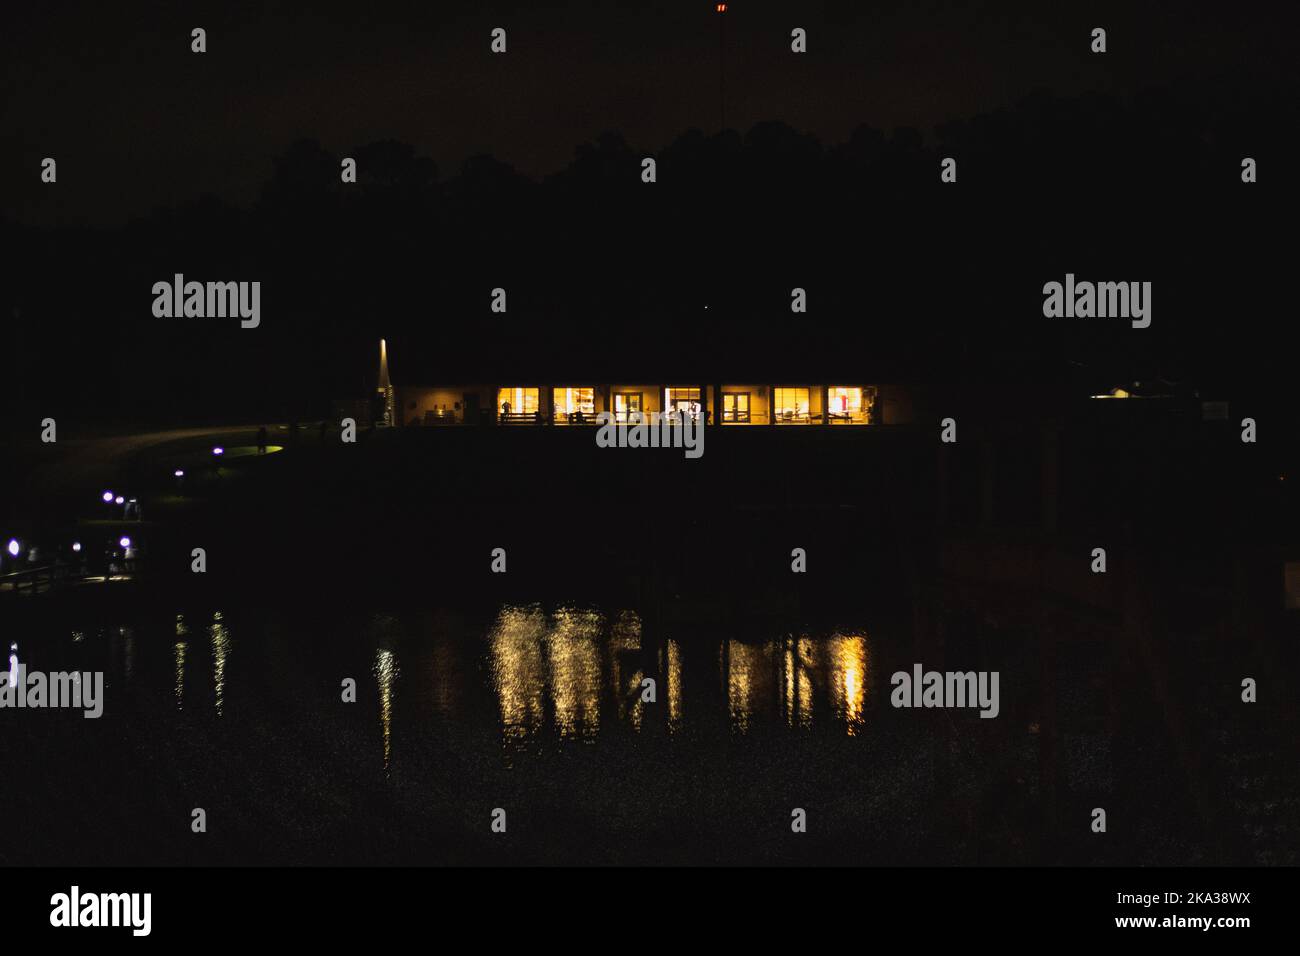 The bright yellow lights lightning the building seen over the lake on a dark evening Stock Photo